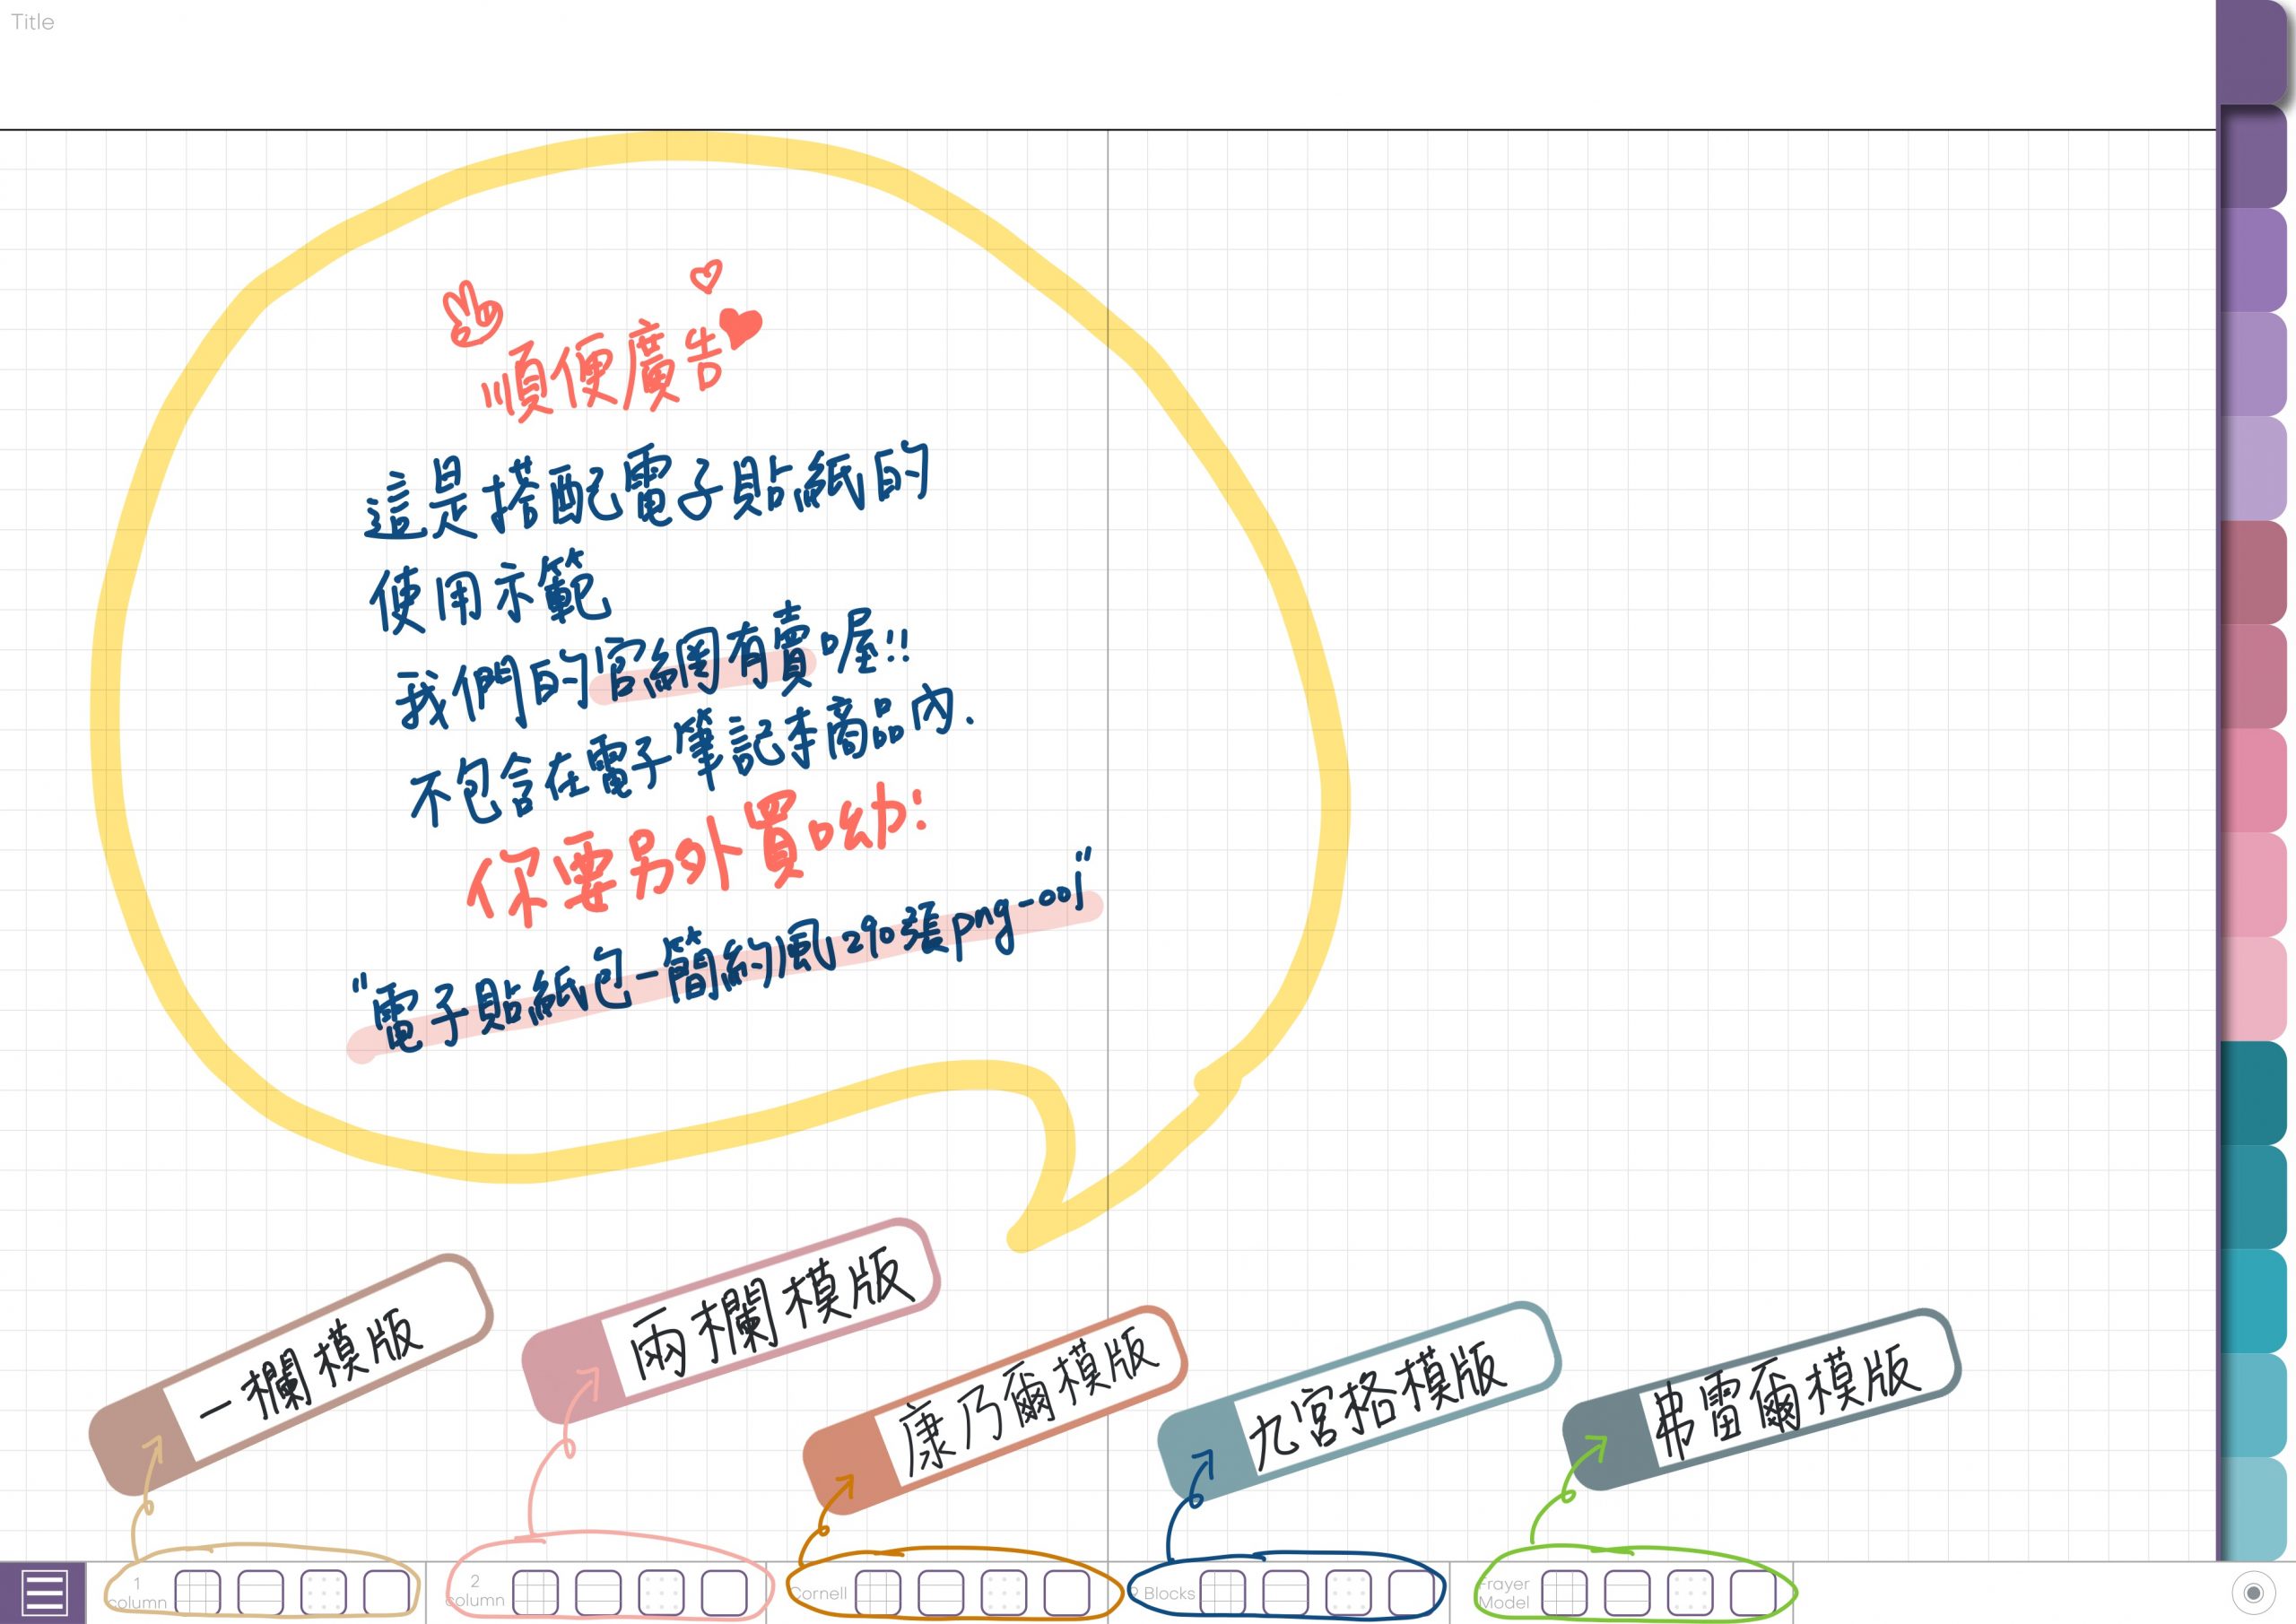 Notebook-Landscape-Solid Color Cover-15 Tabs-Tornado Bubble Dreamland-White Mode 筆記頁手寫說明6 | me.Learning